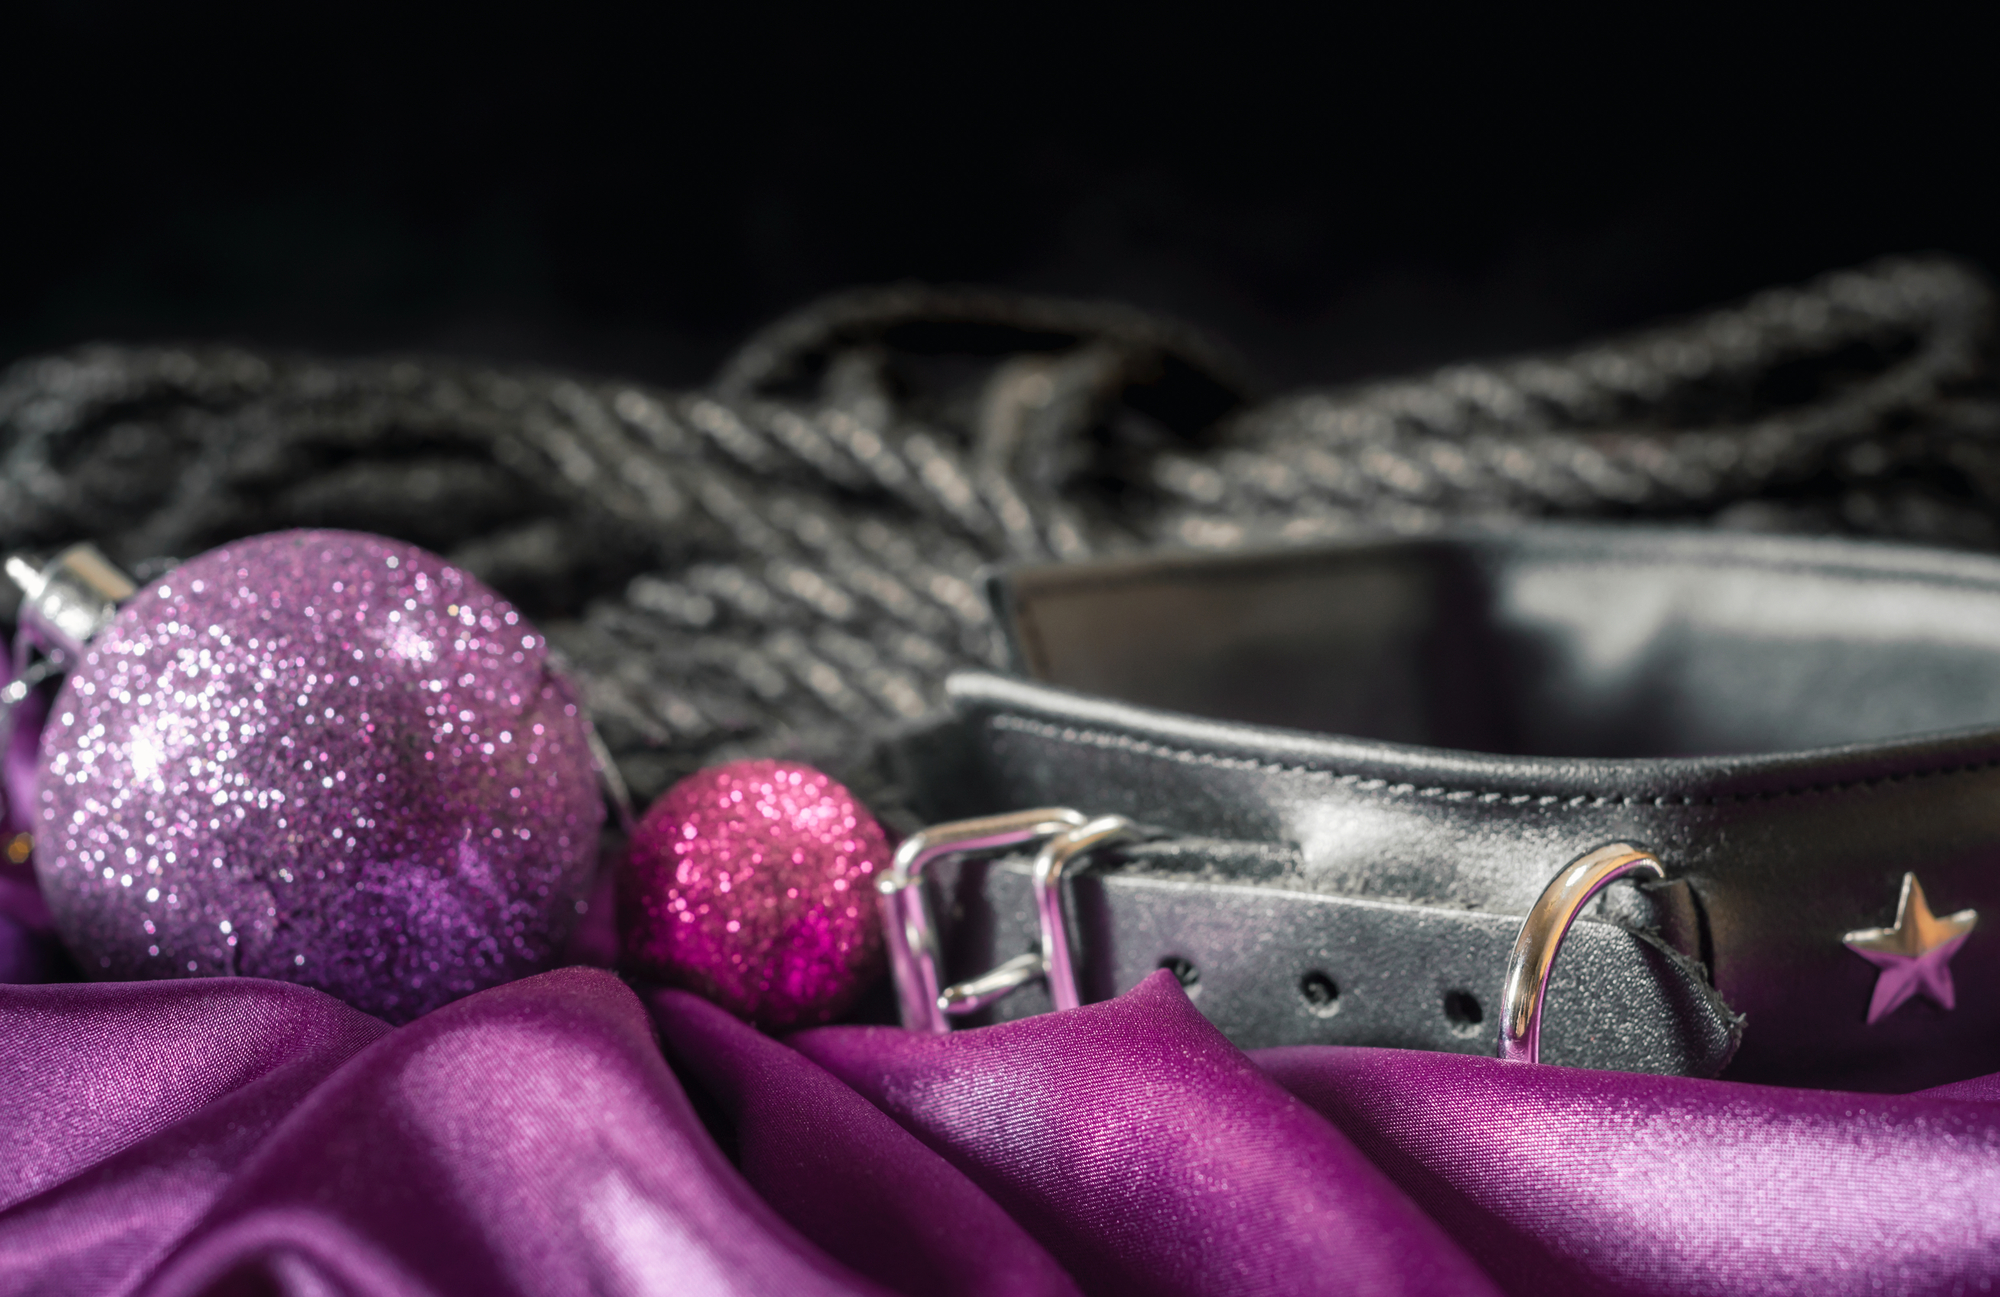 Unwrapping Kink: Celebrating BDSM Holiday Traditions with Your Partner